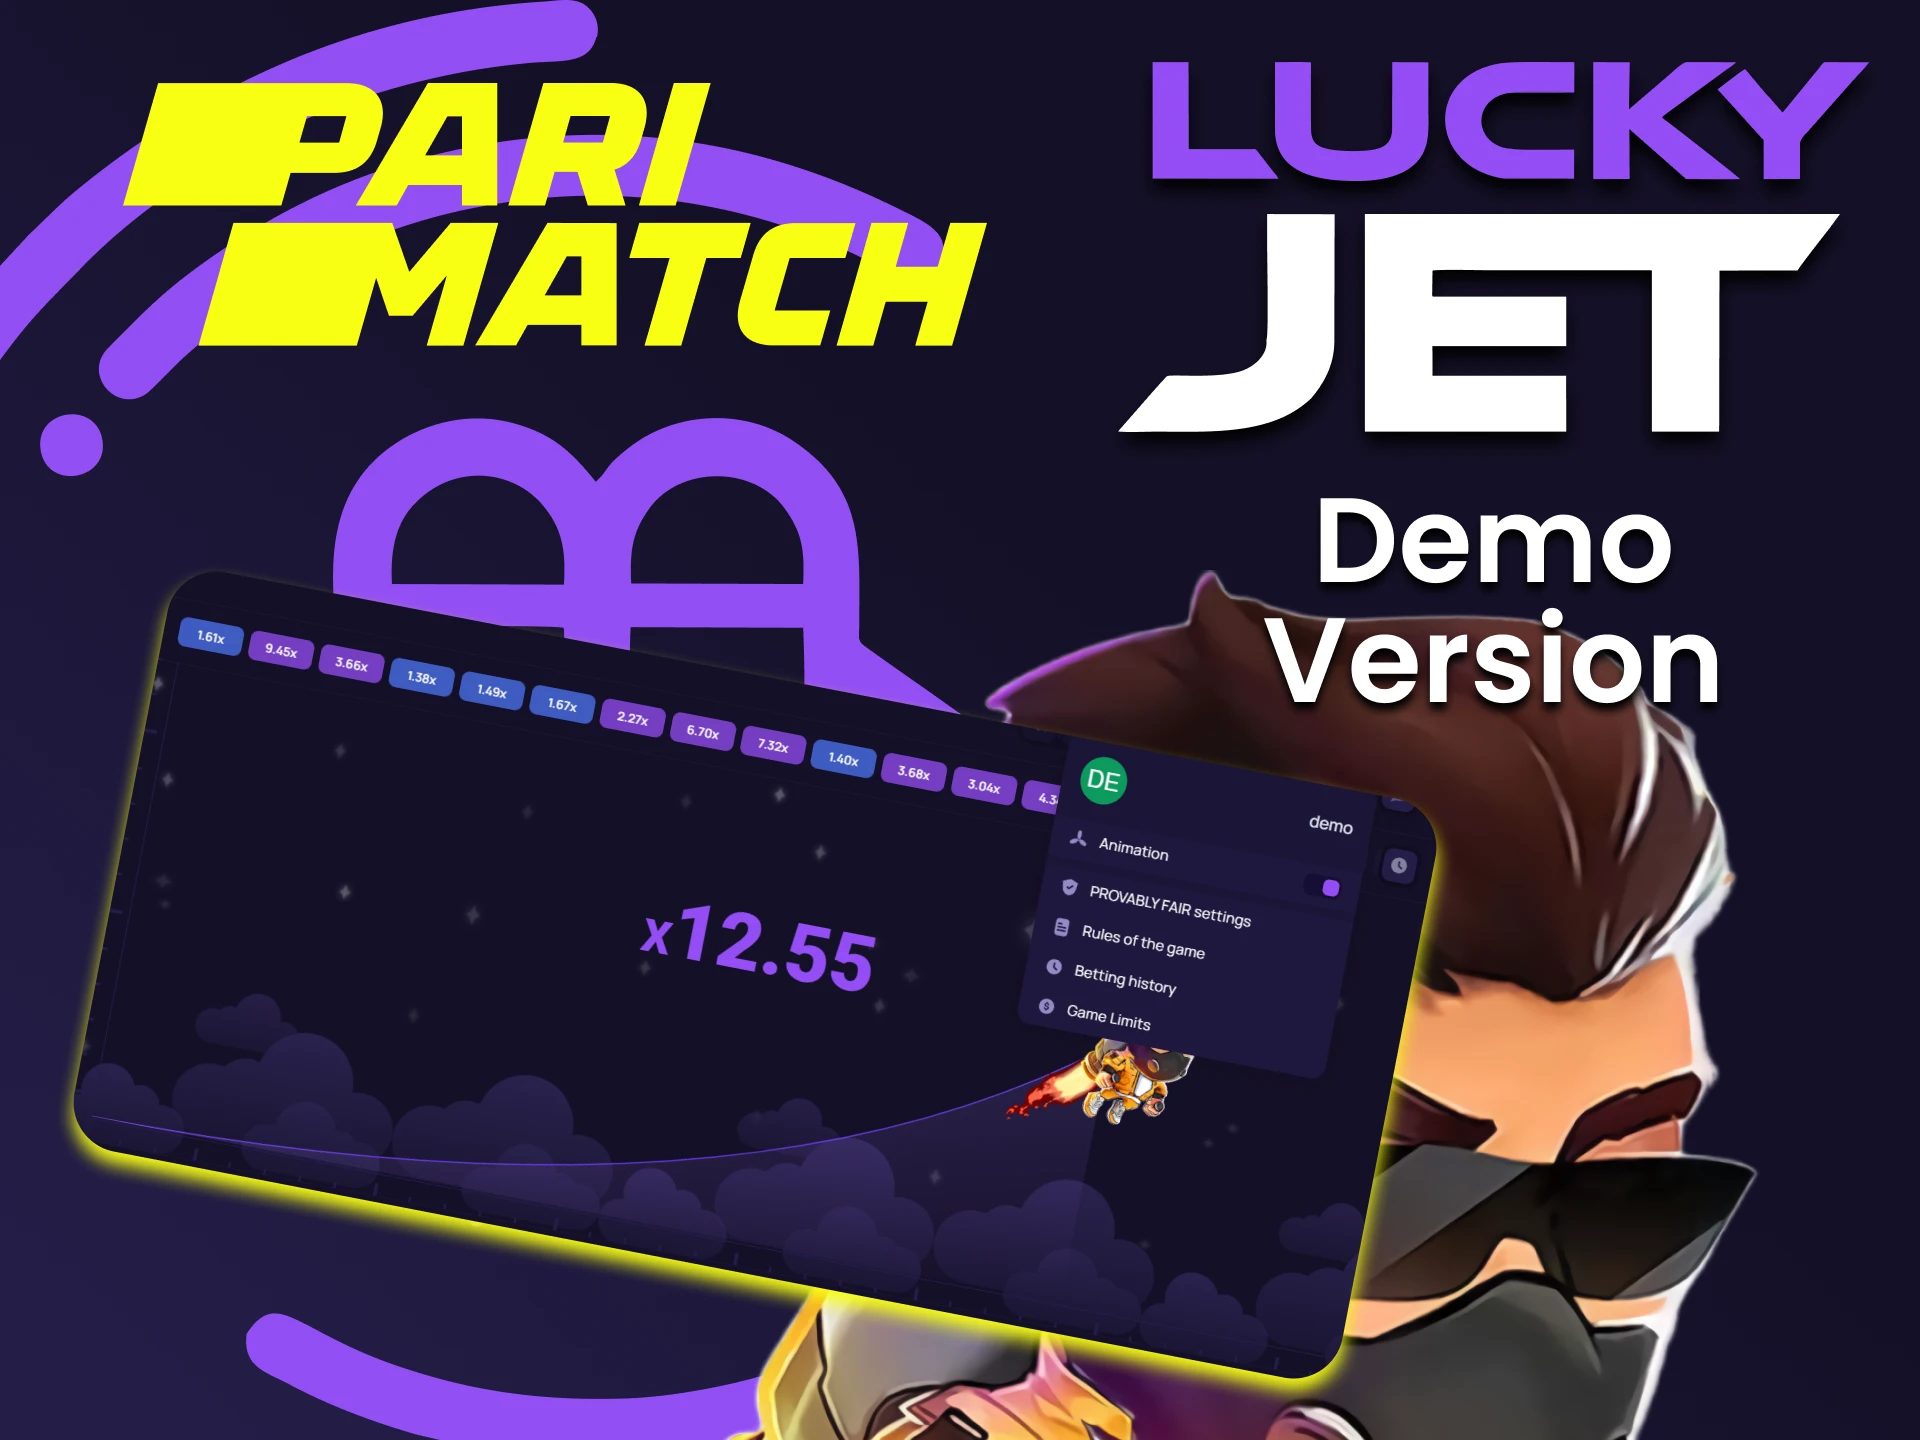 Train in a special version of the Lucky Jet game from Parimatch.